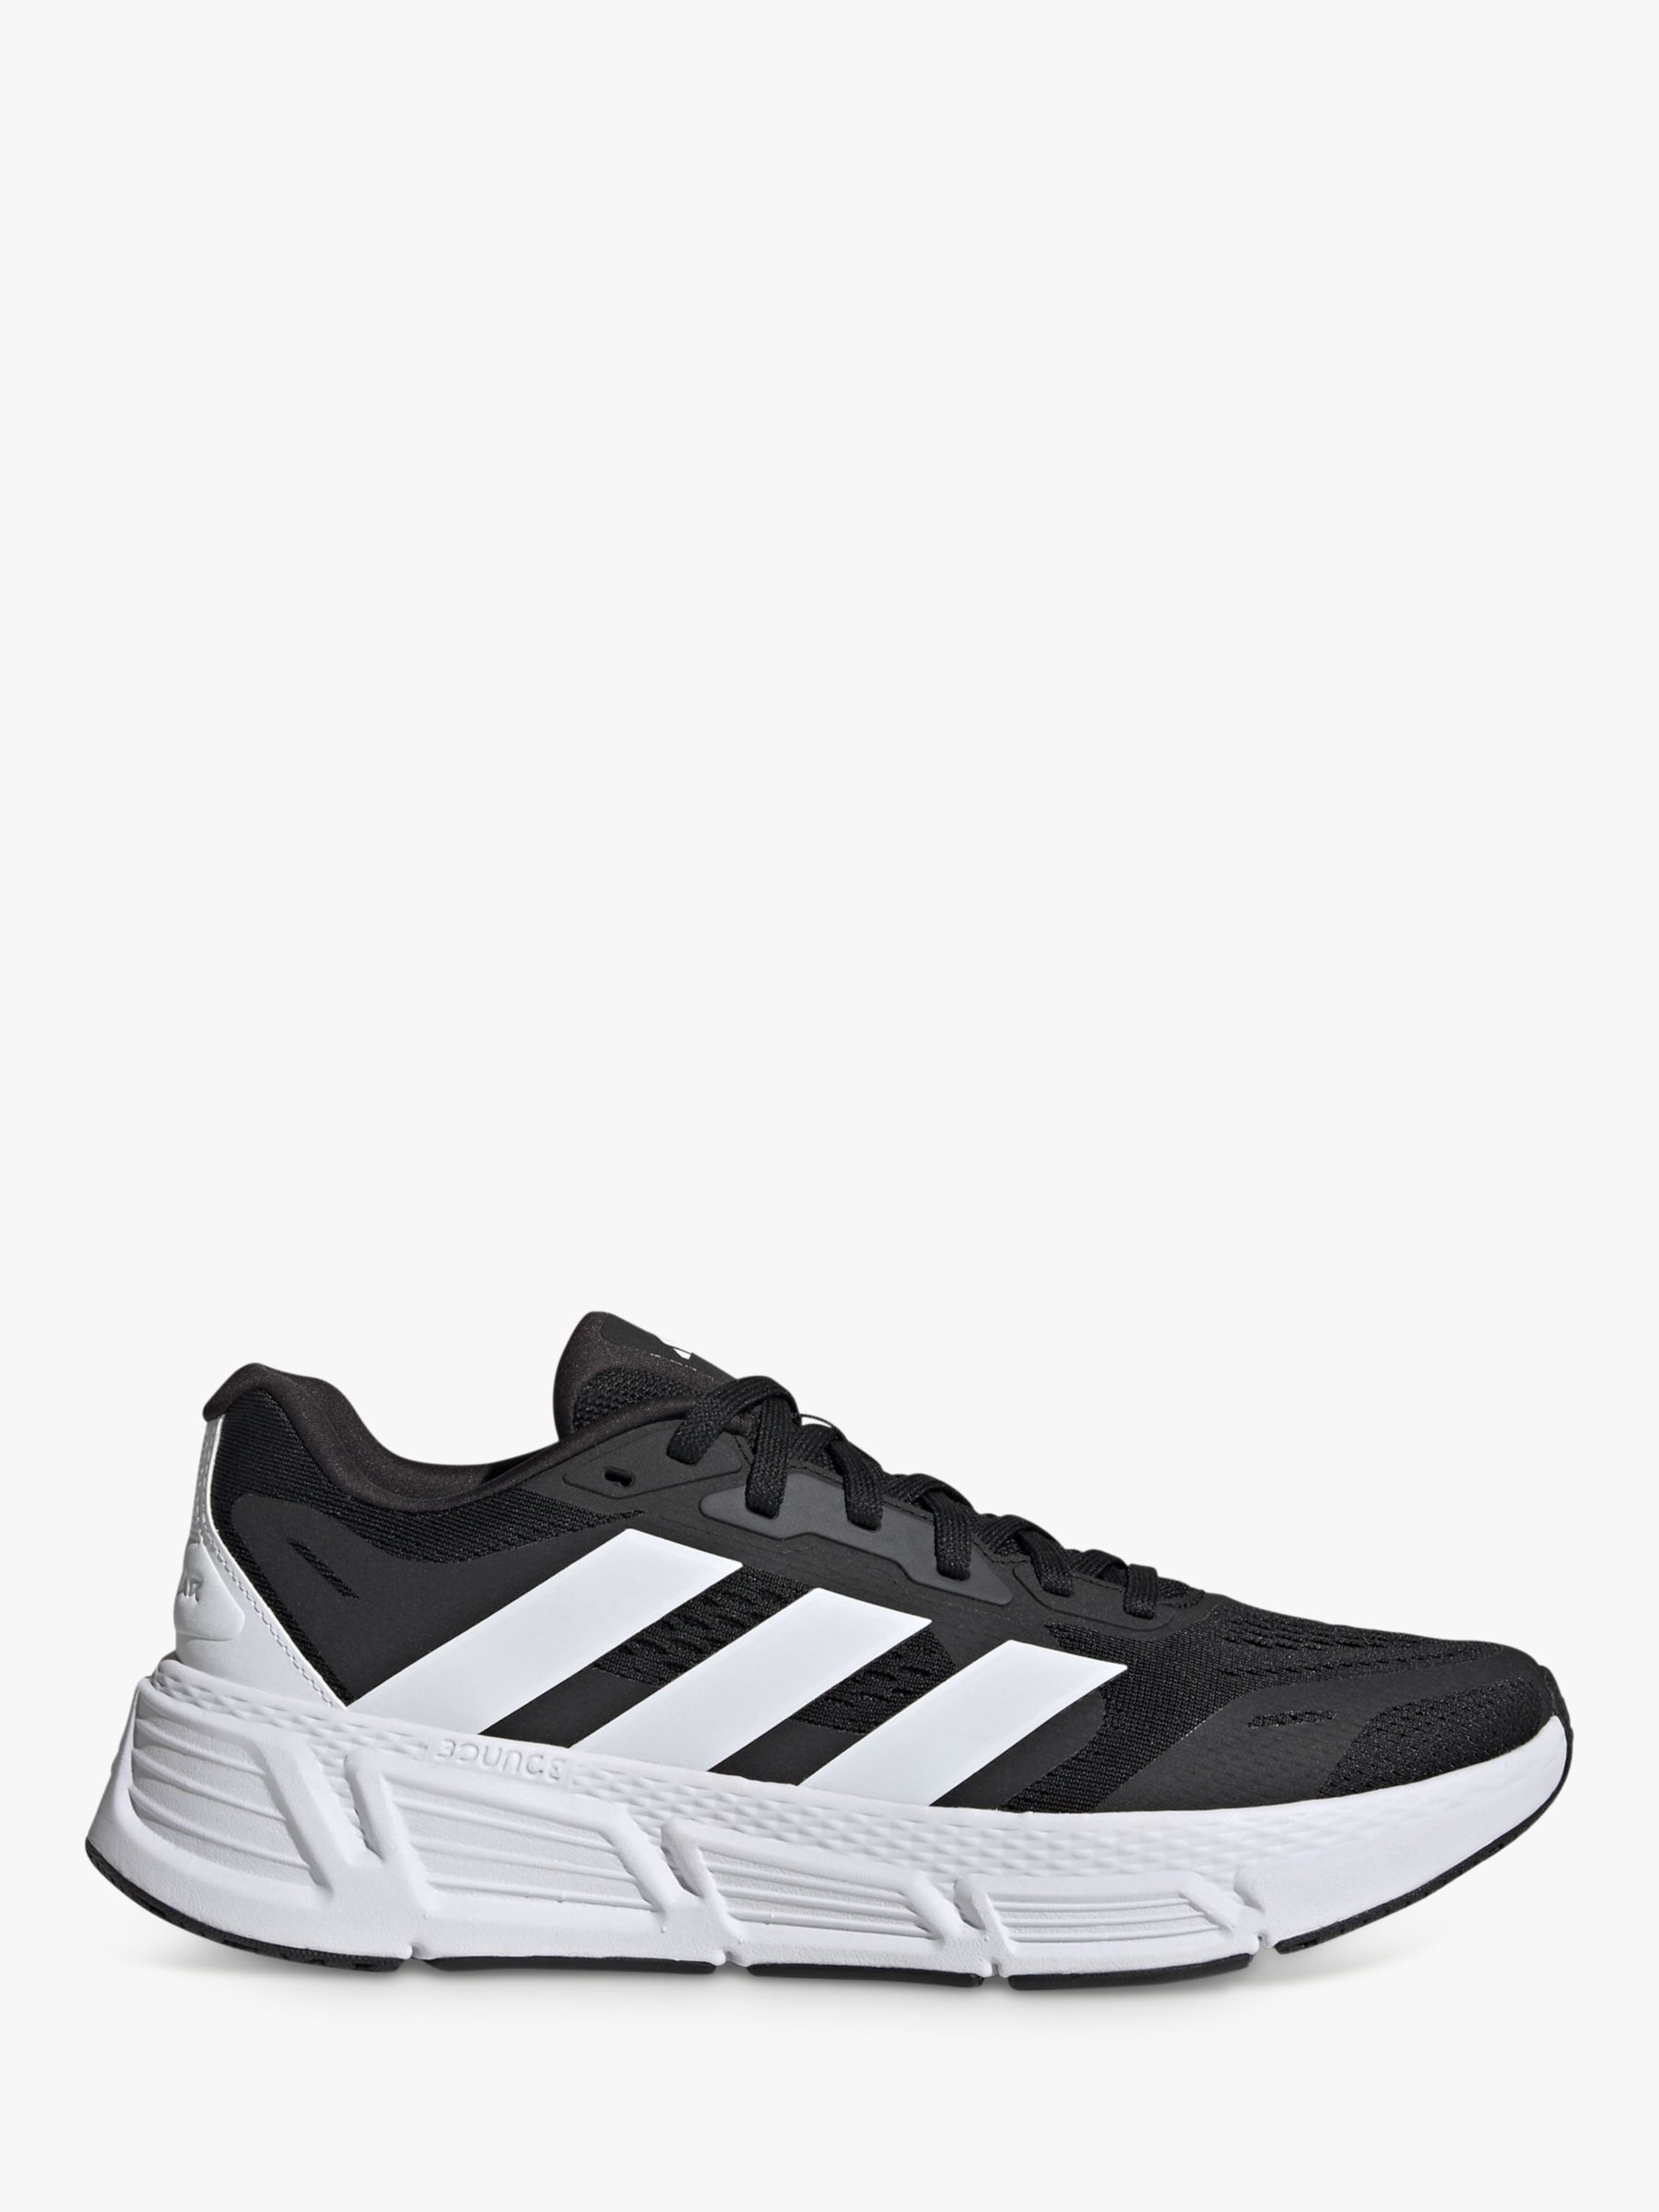 Buy adidas Questar 2 Bounce Men's Running Shoes Online at johnlewis.com